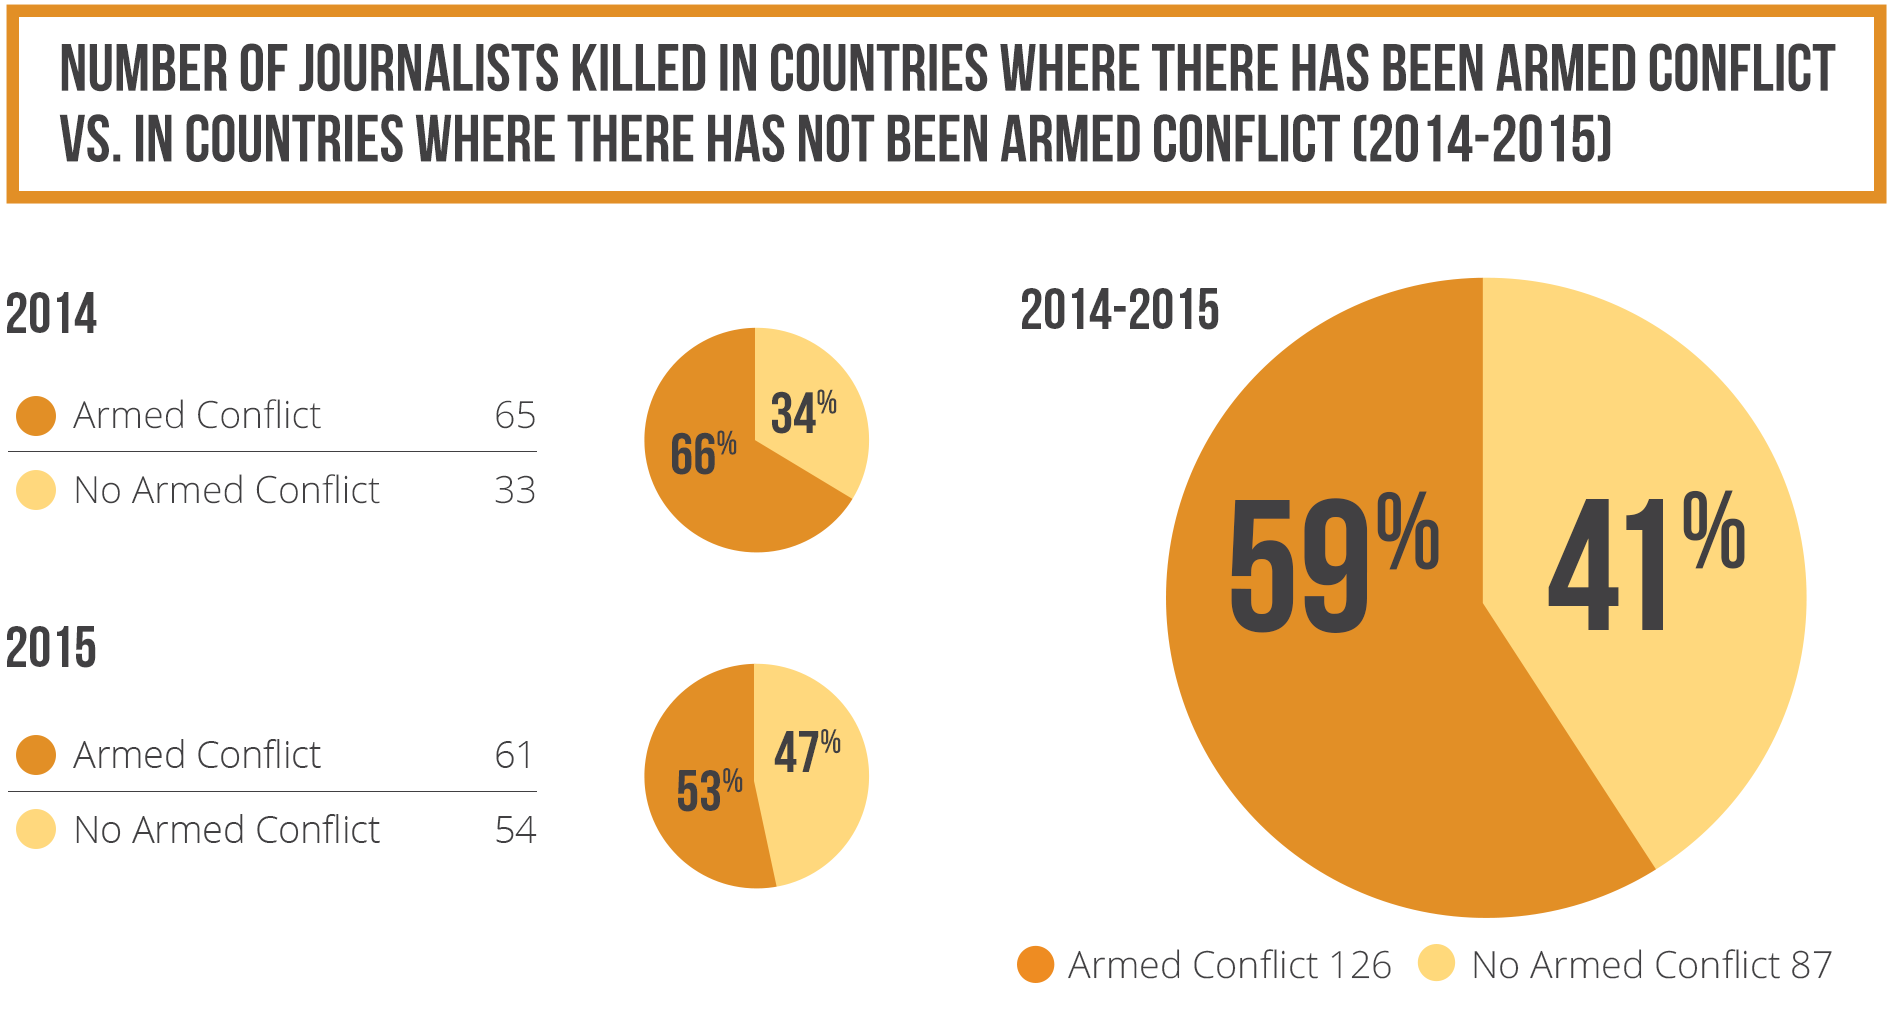 Number of journalists killed in countries where there has been armed conflict vs. in countries where there has not been armed conflict 2014-2015